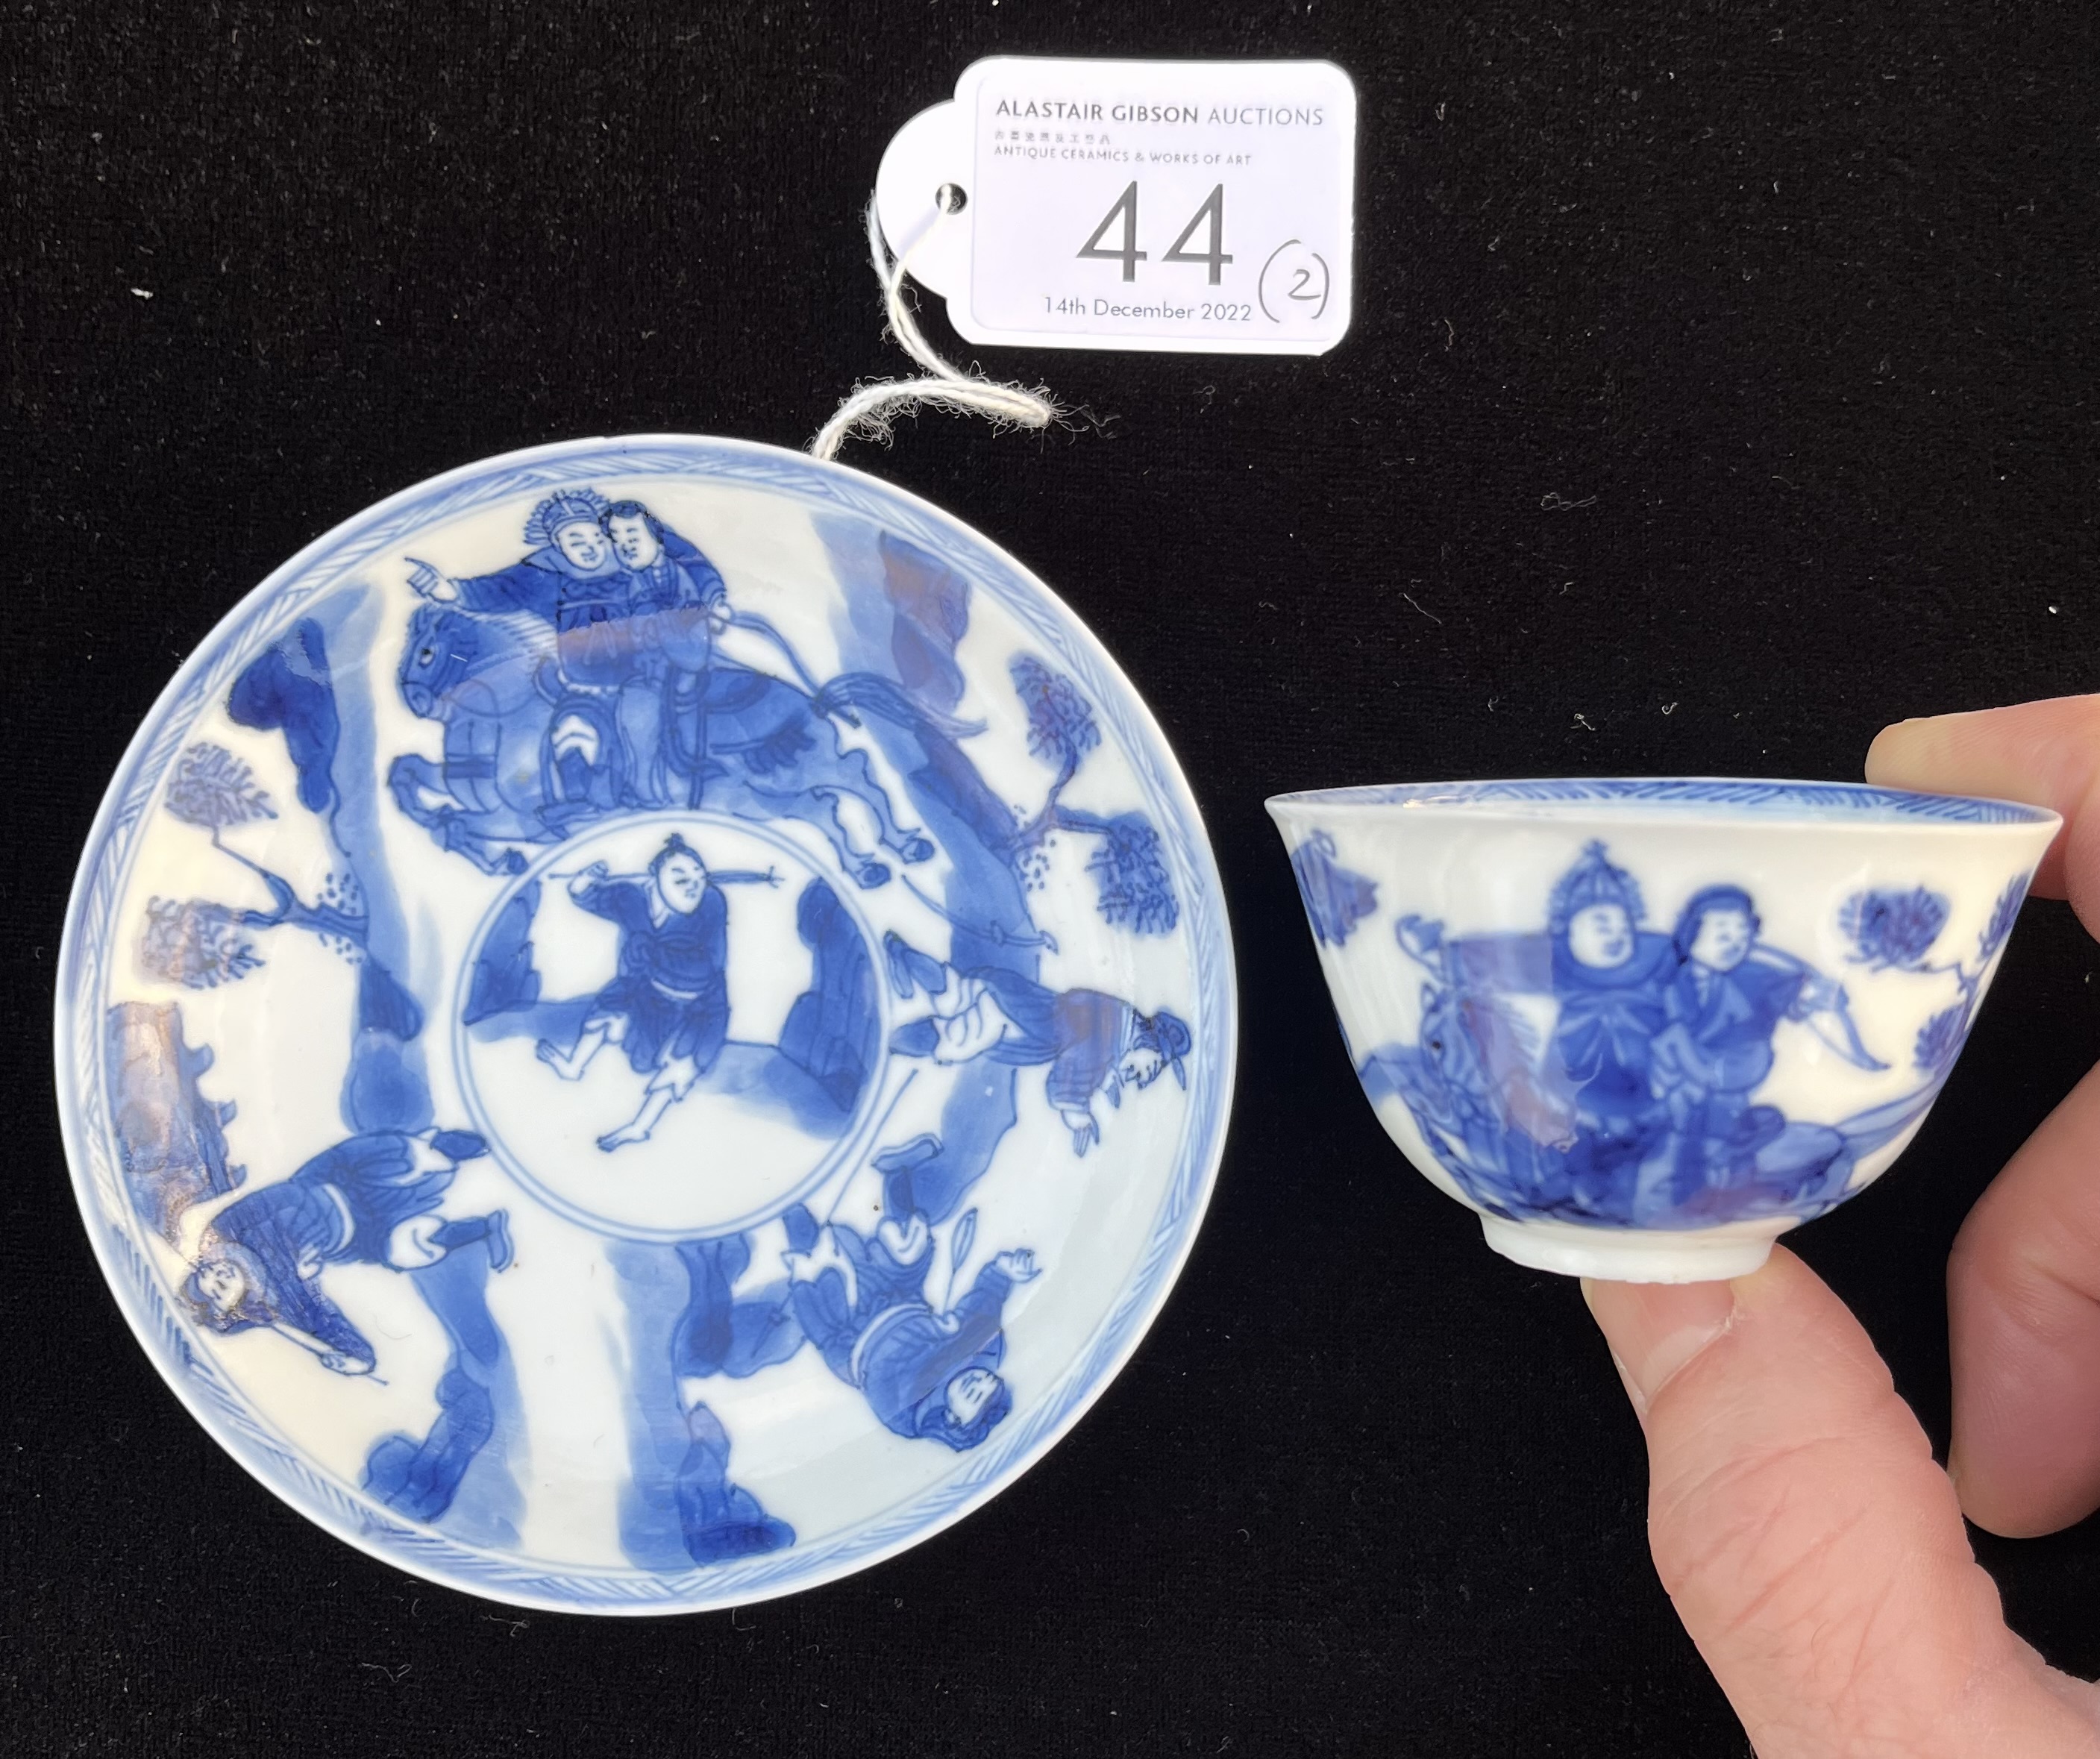 A CHINESE BLUE AND WHITE PORCELAIN TEA BOWL AND SAUCER, QING DYNASTY, KANGXI PERIOD, 1662 – 1722 - Image 7 of 7